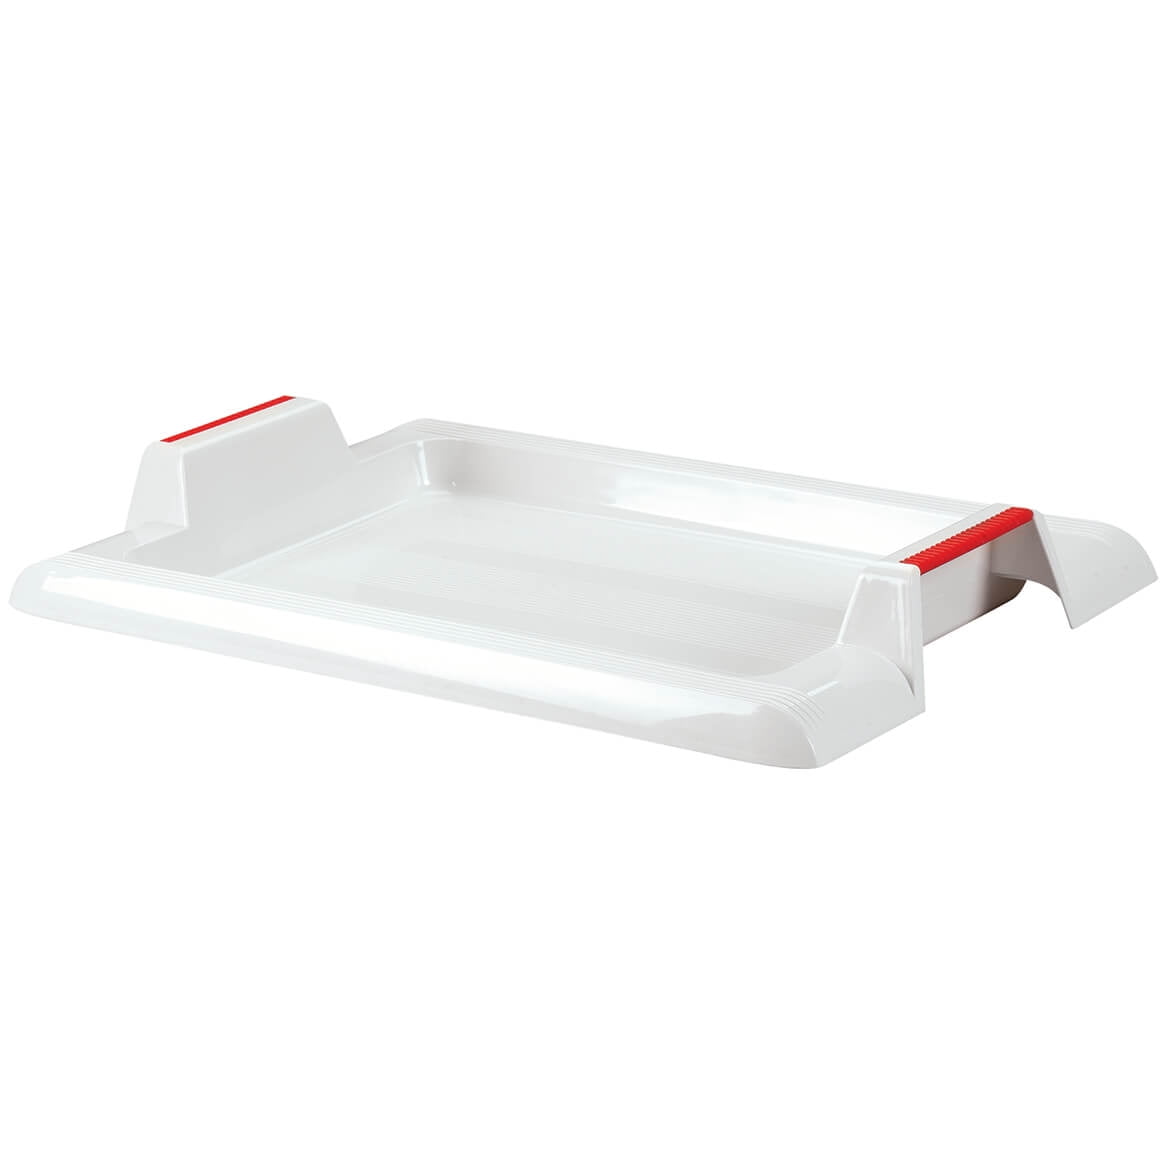 Bone off White Tray With Handles, Small to Large Sizes for the